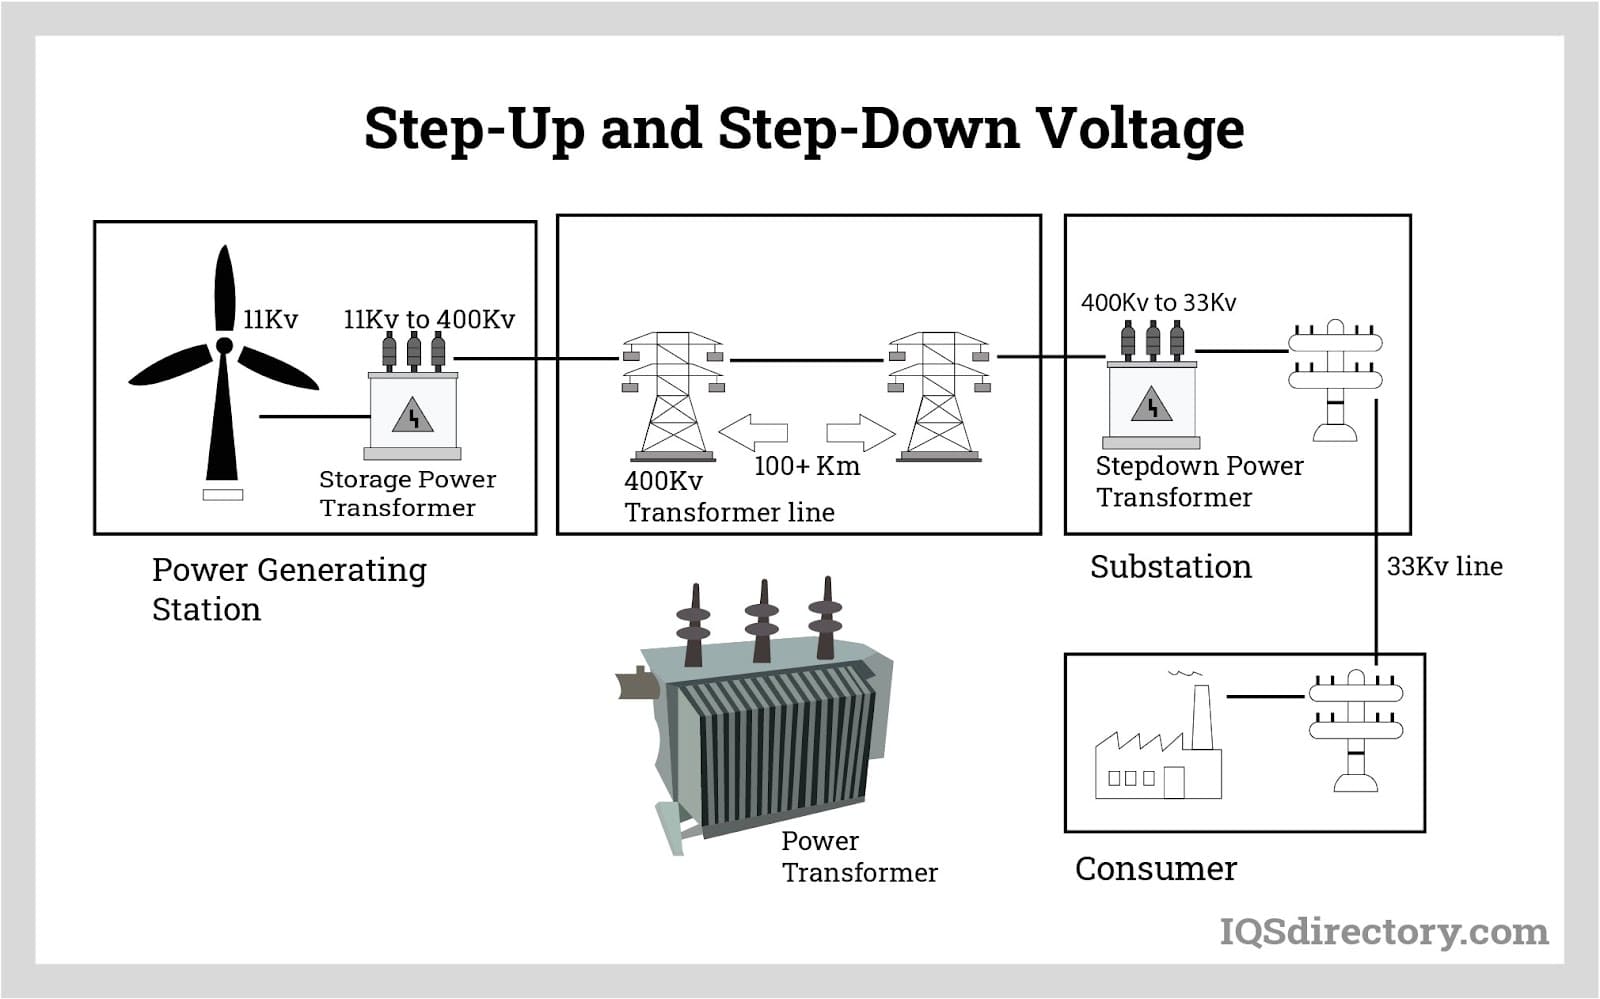 Step-Up and Step-Down Voltage